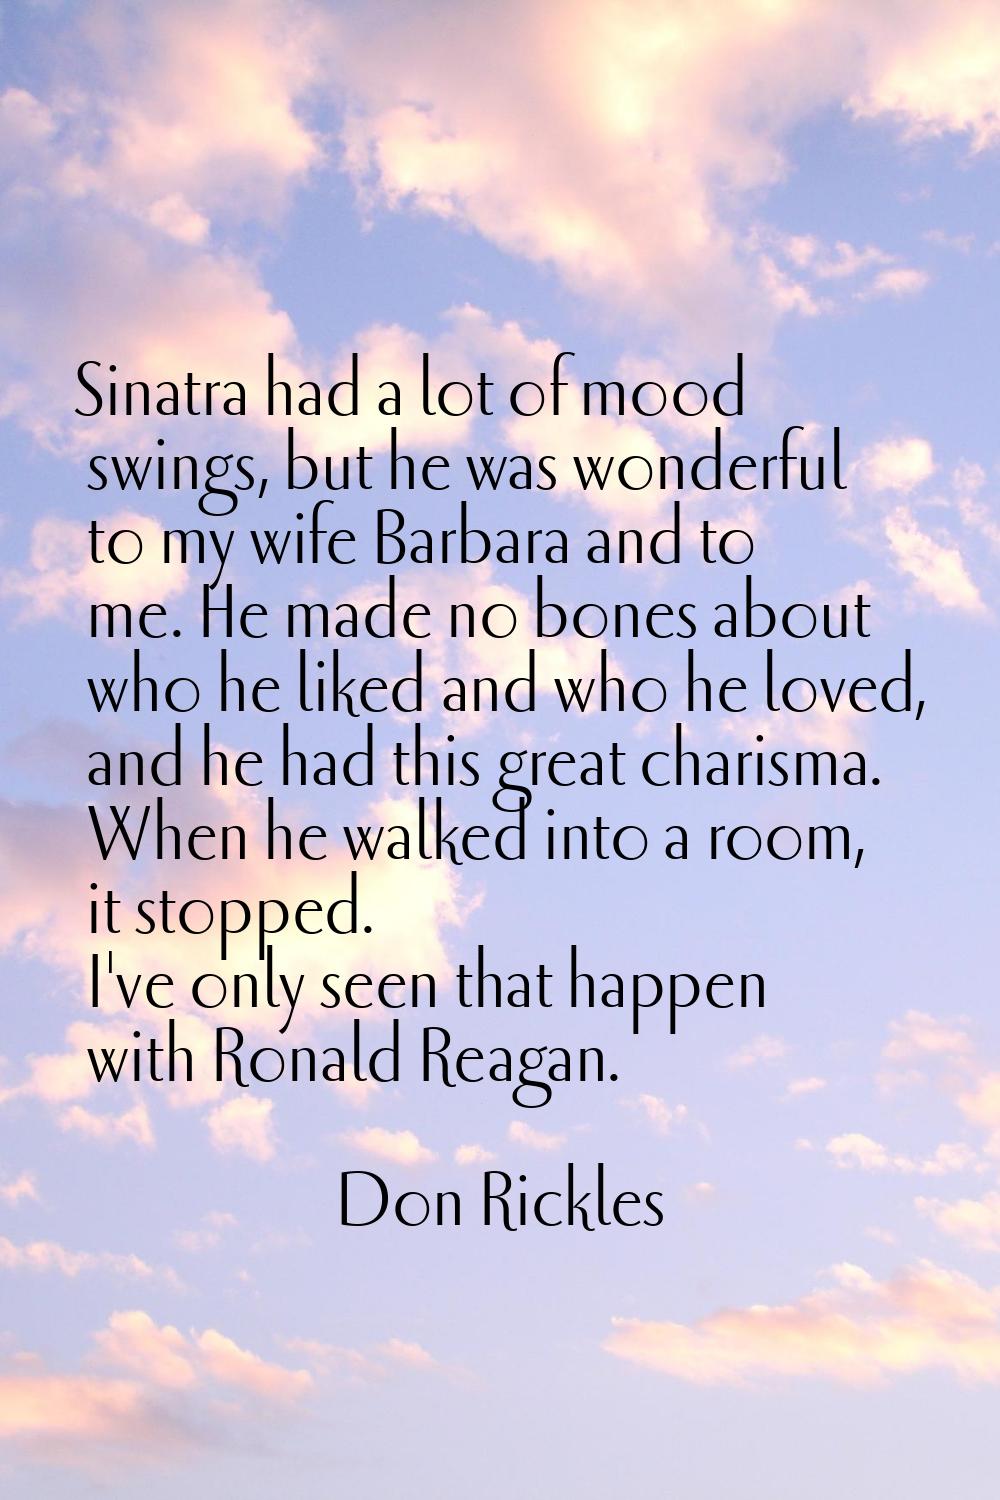 Sinatra had a lot of mood swings, but he was wonderful to my wife Barbara and to me. He made no bon